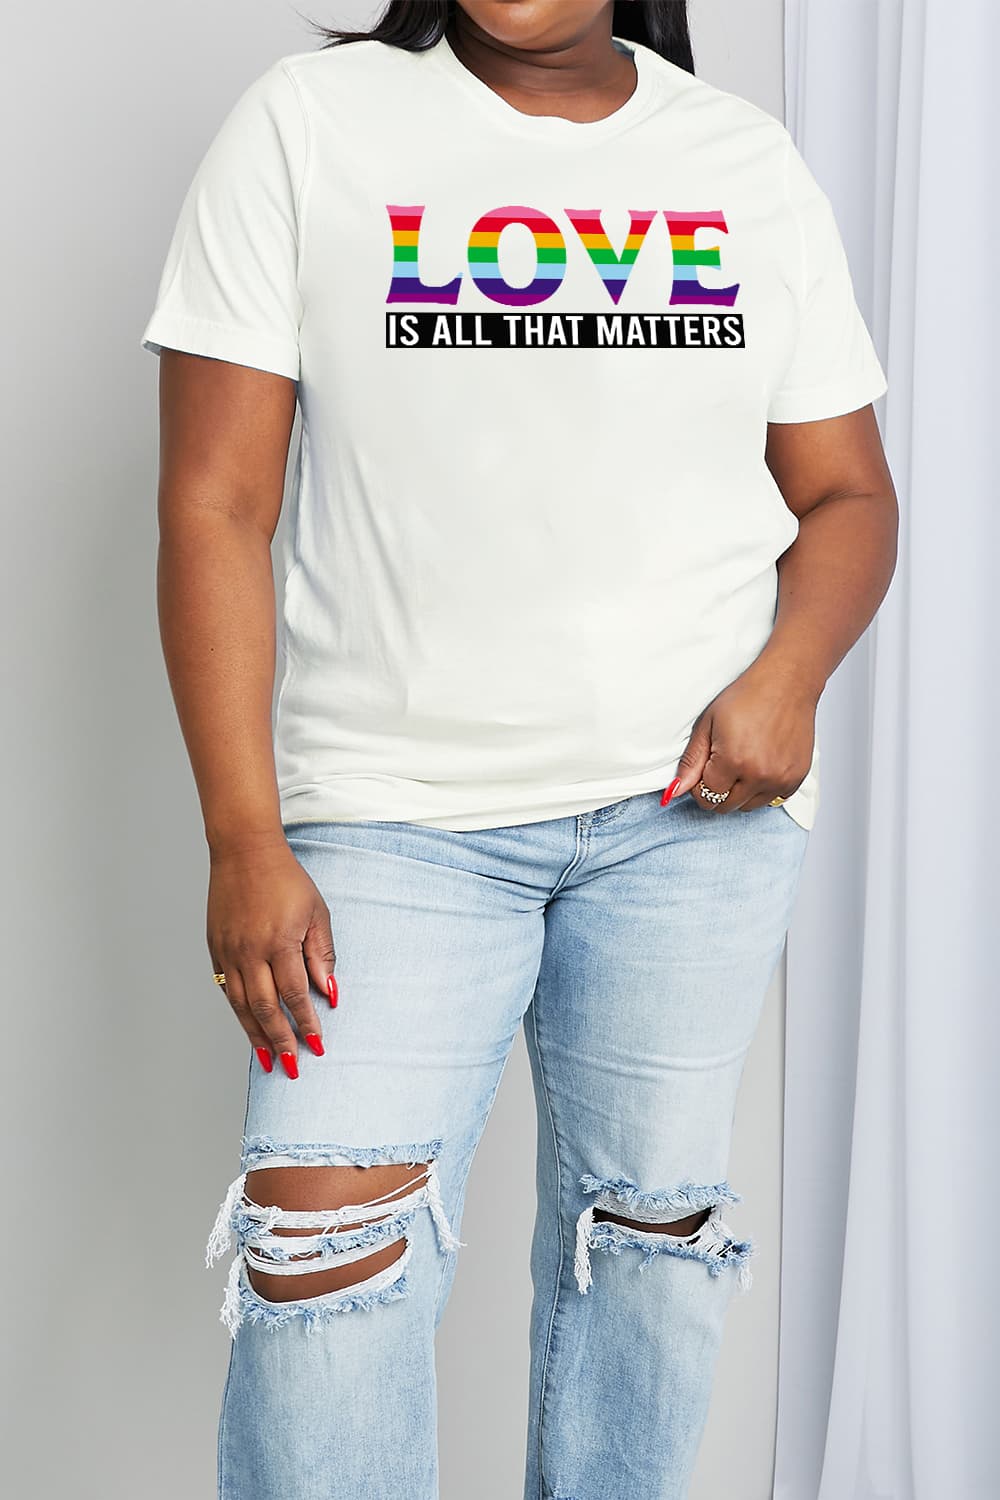 Simply Love Full Size LOVE IS ALL THAT MATTERS Graphic Cotton Tee